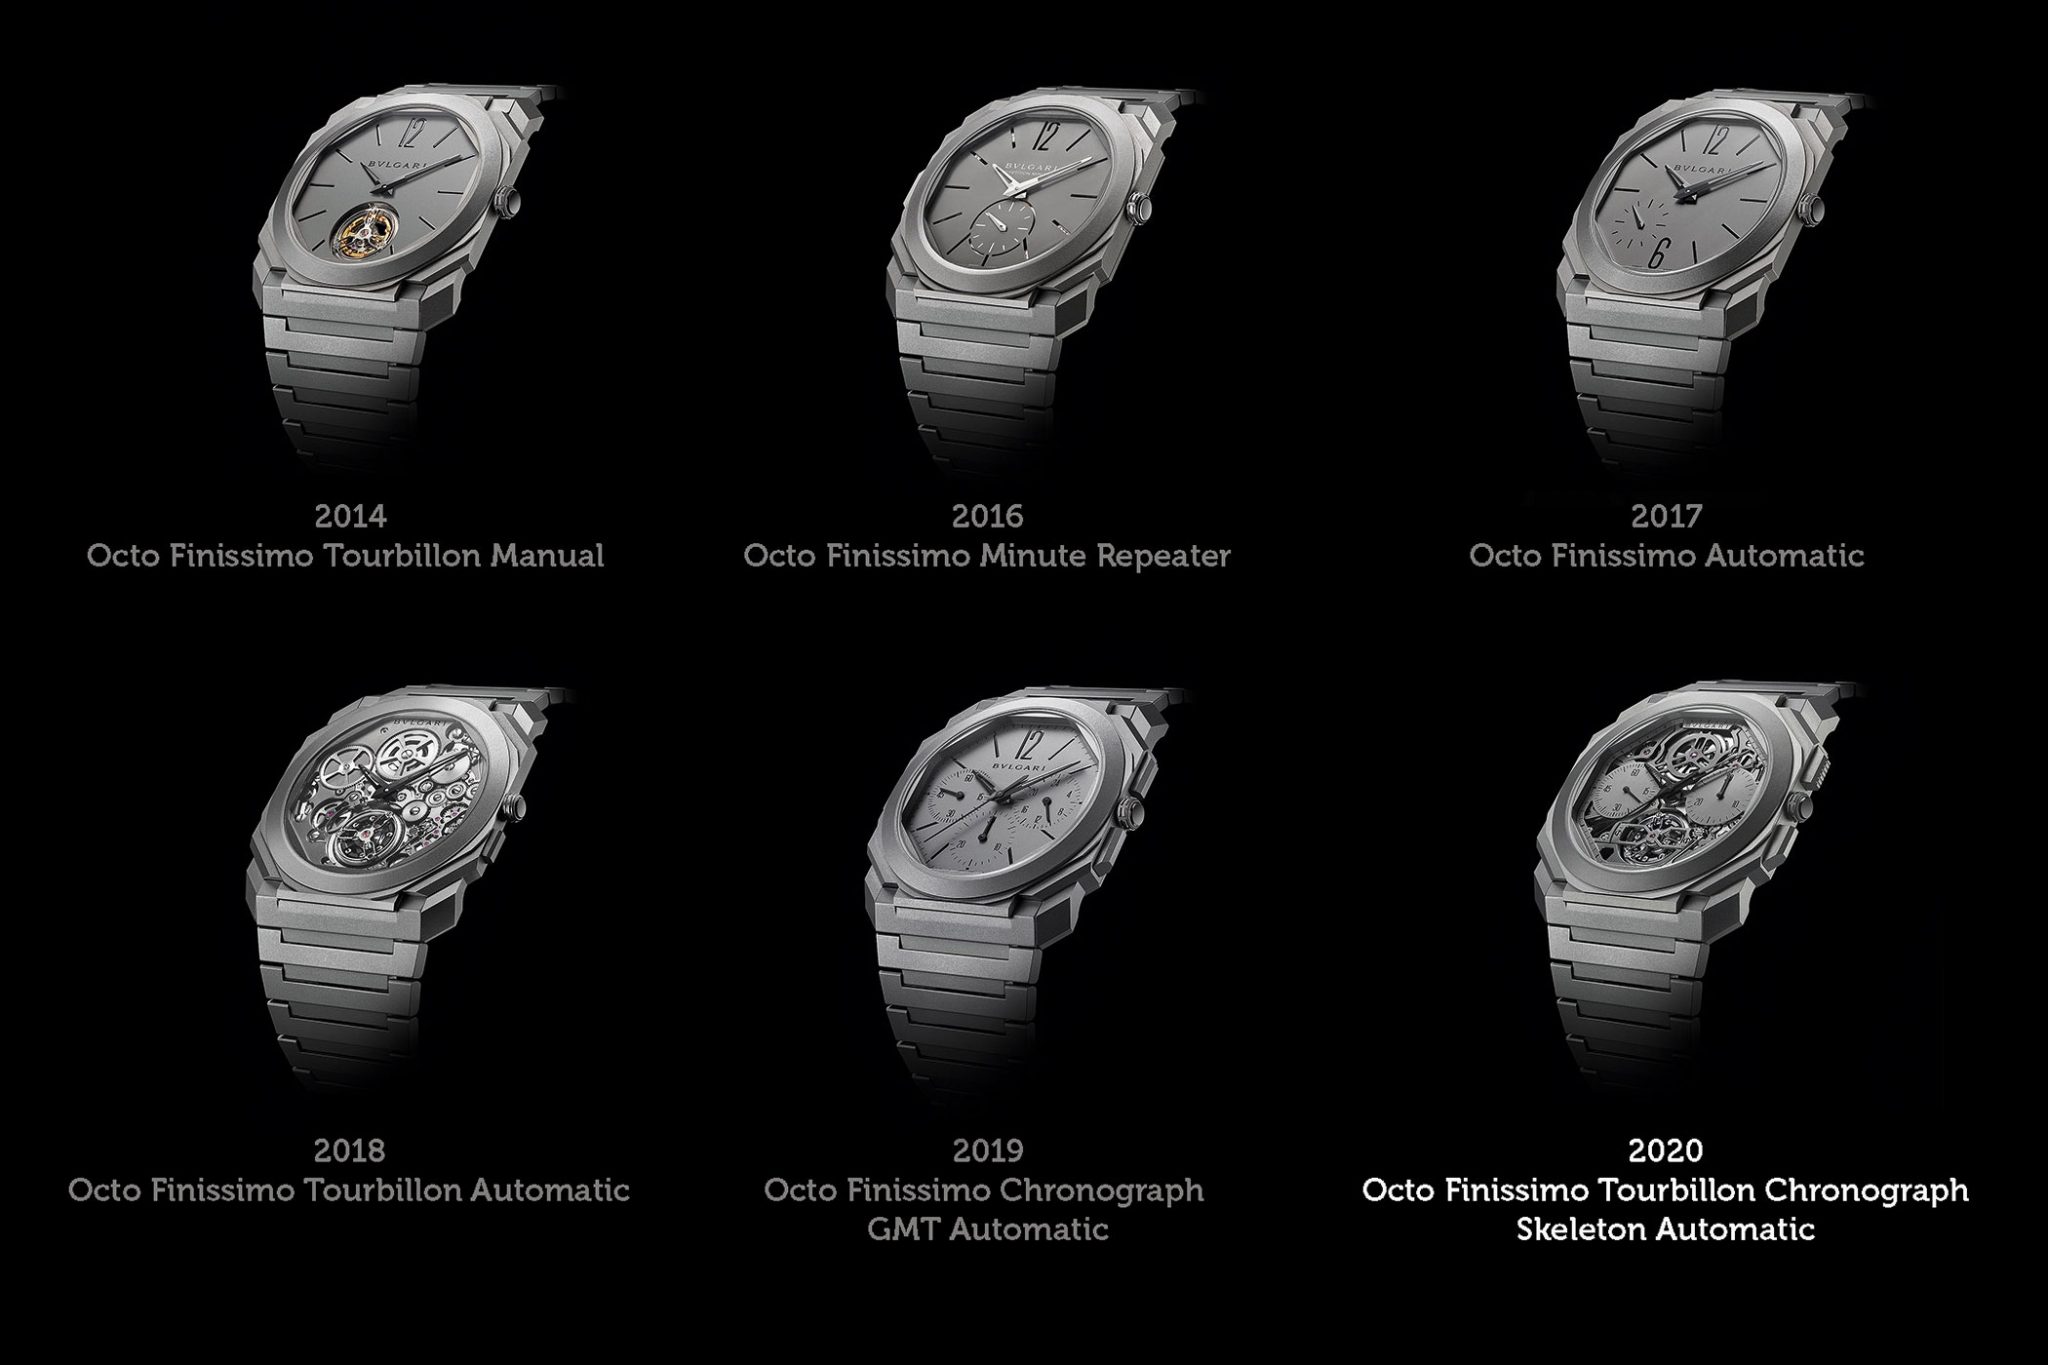 Bulgari-Octo-Finissimo-World-Records-watches-overview